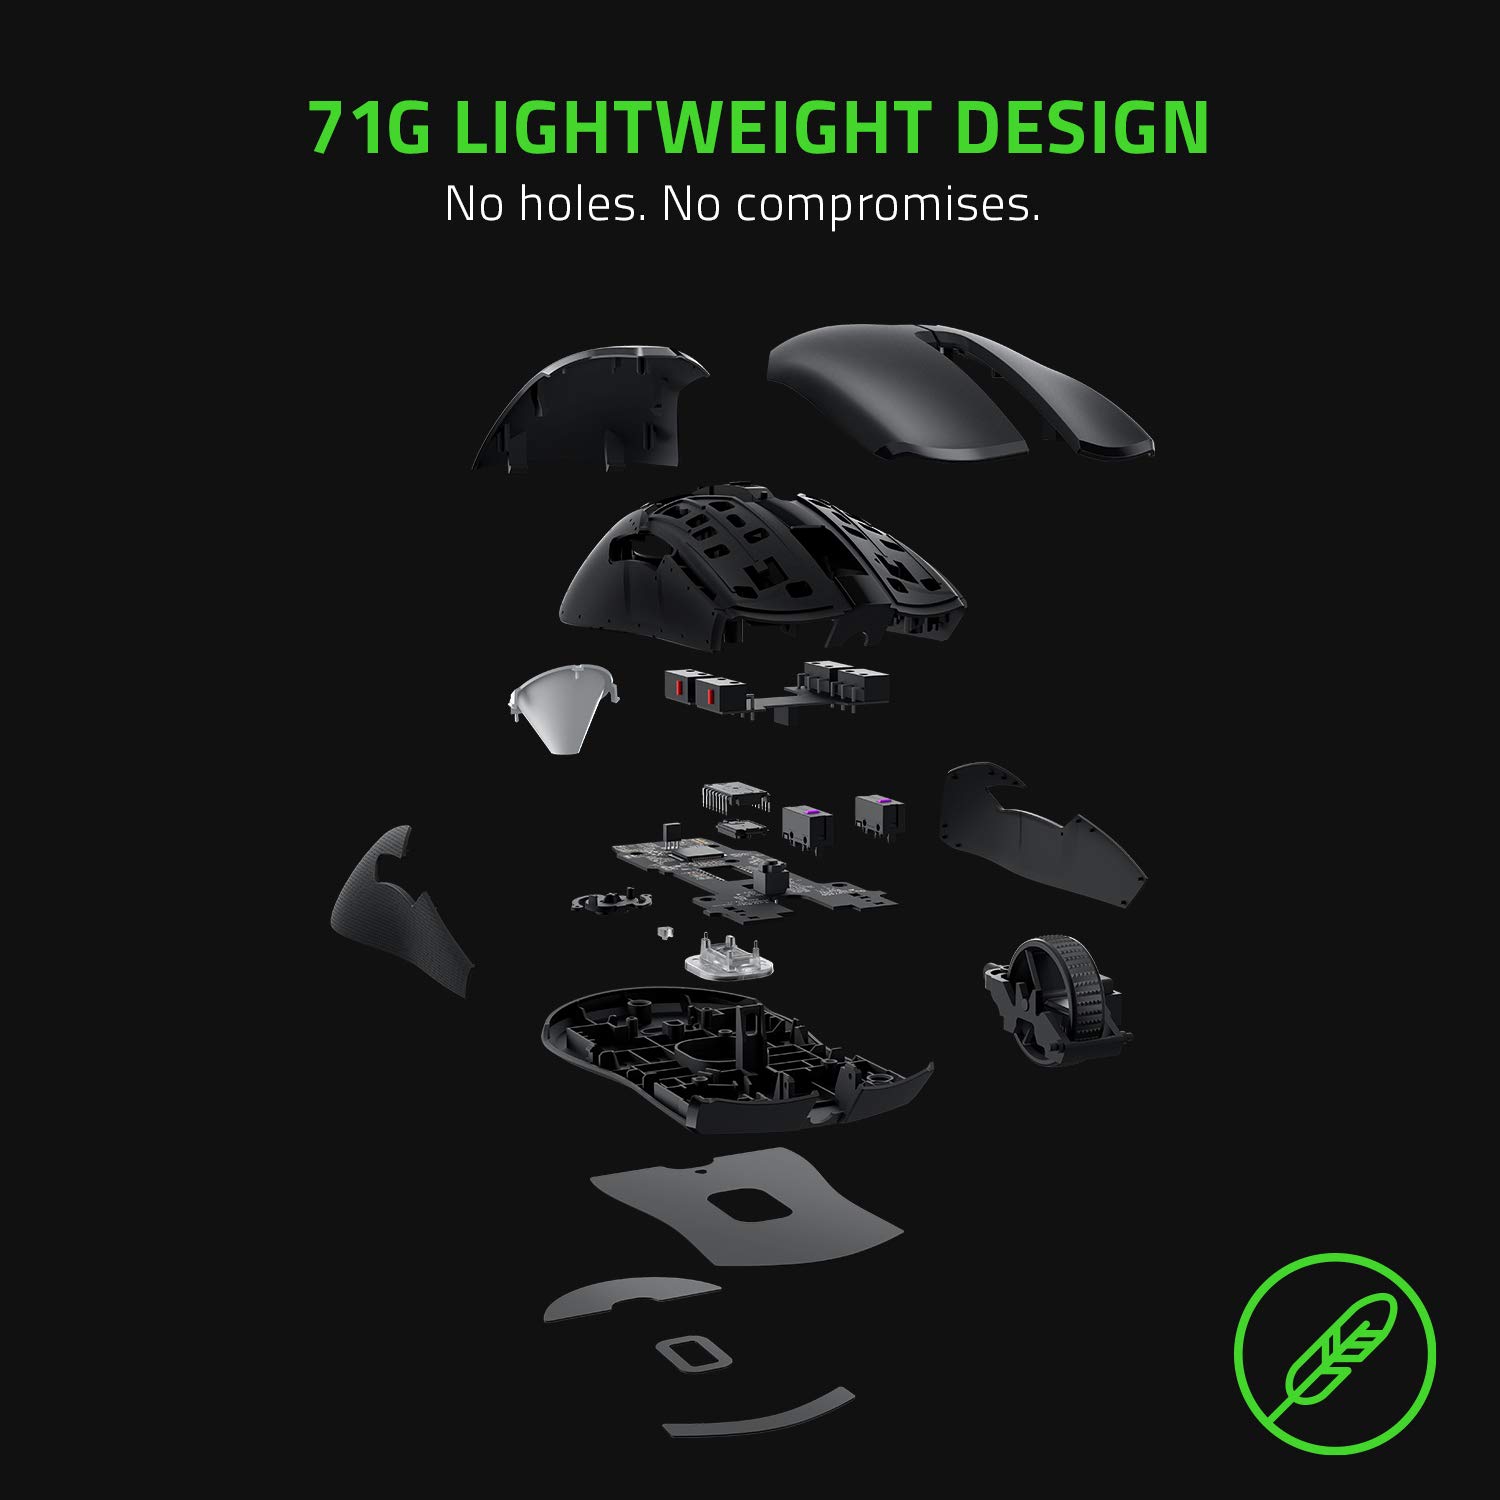 Razer Viper 8KHz Ultralight Ambidextrous Wired Gaming Mouse: Fastest Gaming Switches - 20K DPI Optical Sensor - Chroma RGB Lighting - 8 Programmable Buttons - 8000Hz HyperPolling - ESL Edition